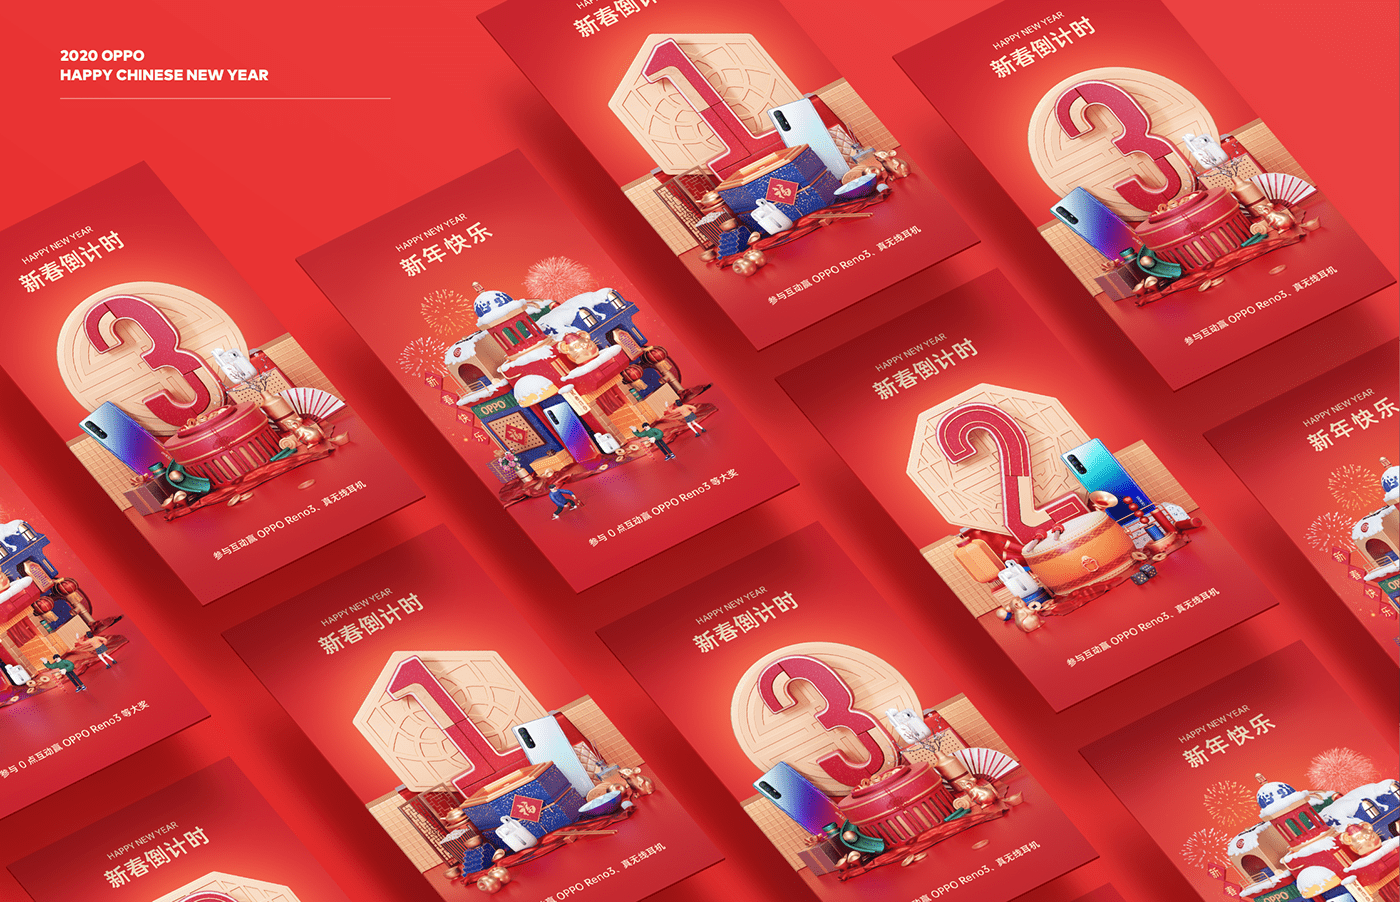 OPPO Happy Chinese New Year Countdown Poster on Behanceb98a6191444031.5e31d478c459a.png